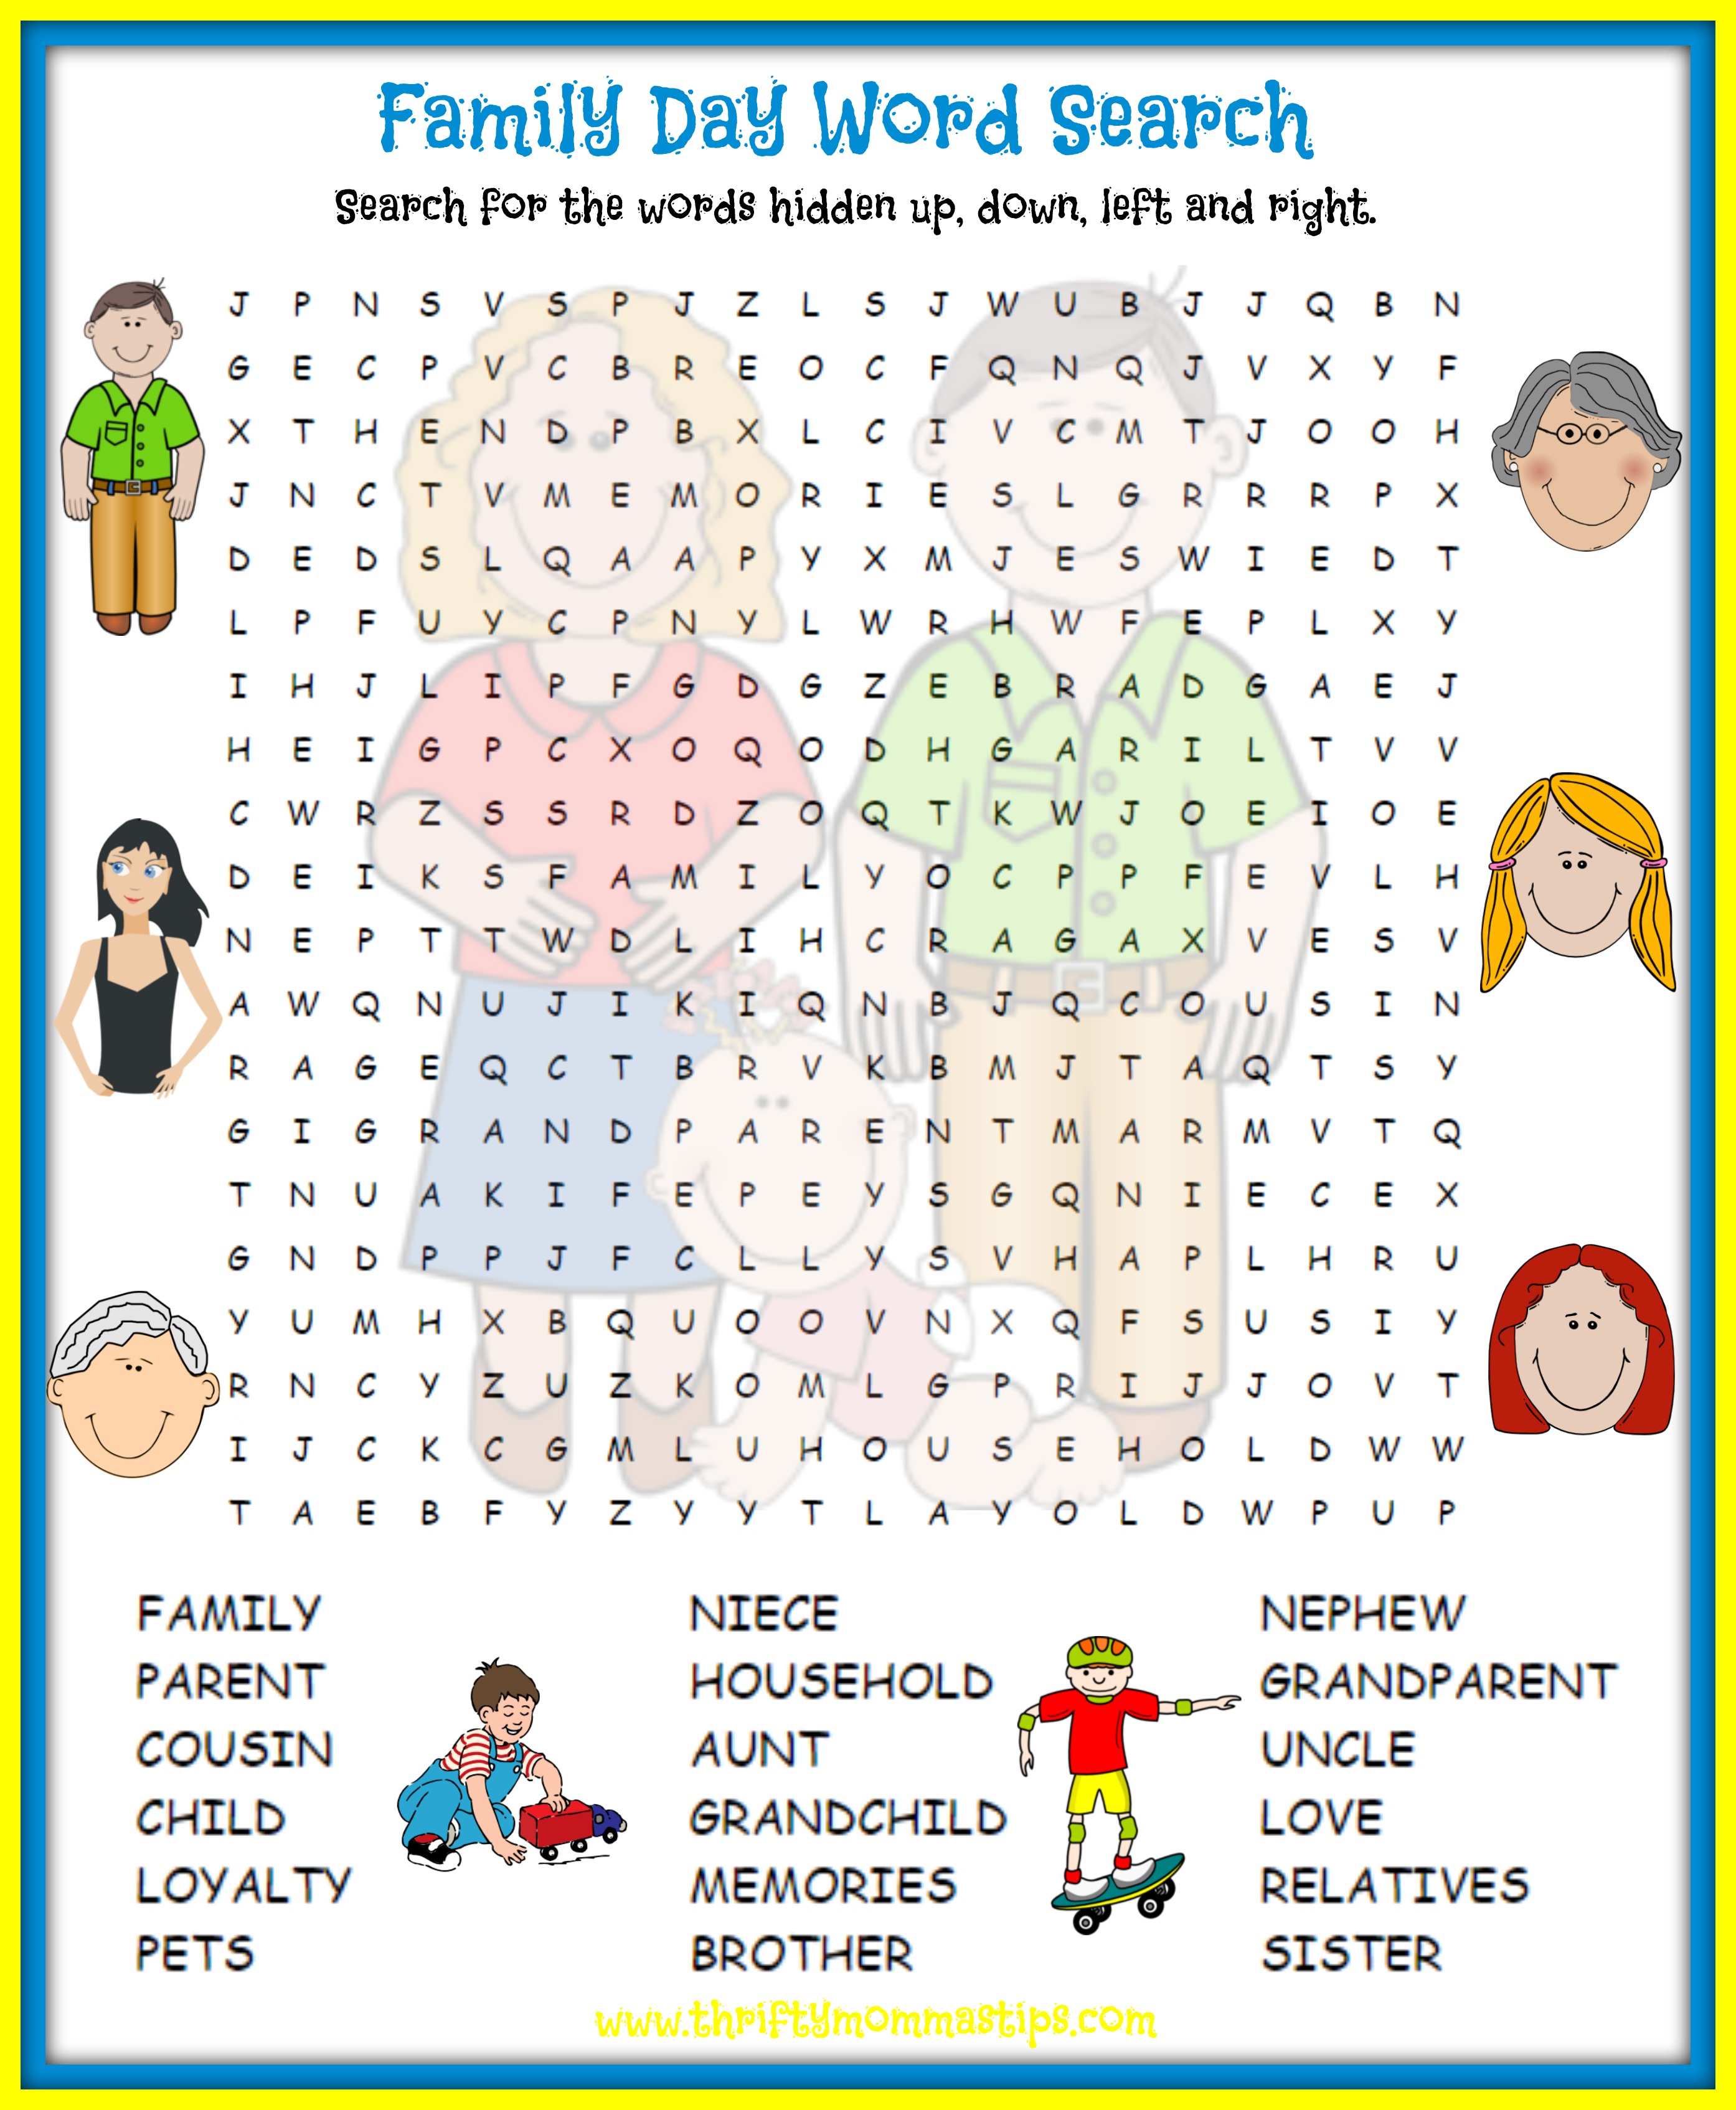 Family Day Word Search